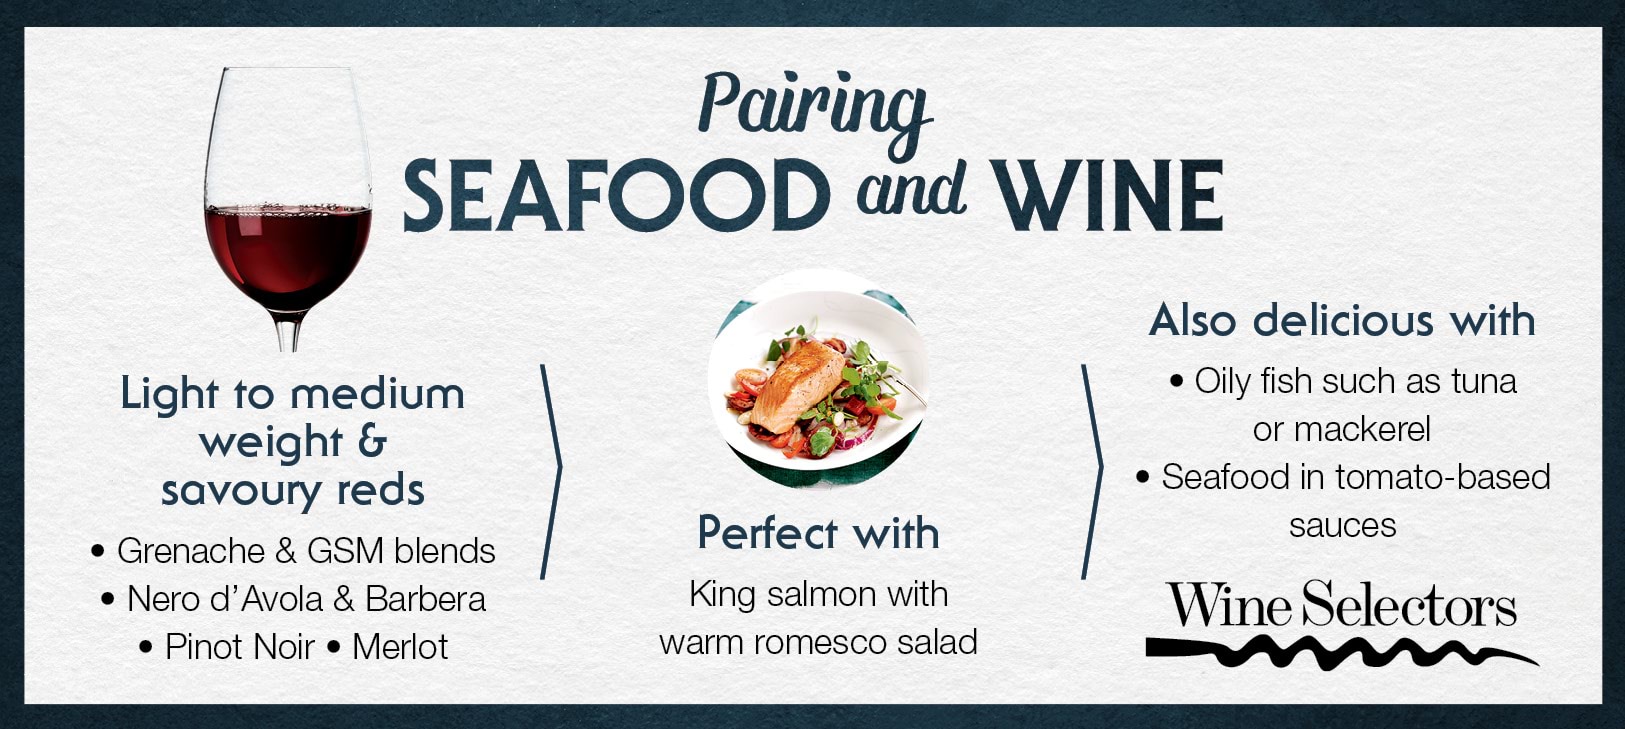 Light to medium-weight savoury red wines pair well with oily fish or tomato-based seafood dishes - infographic